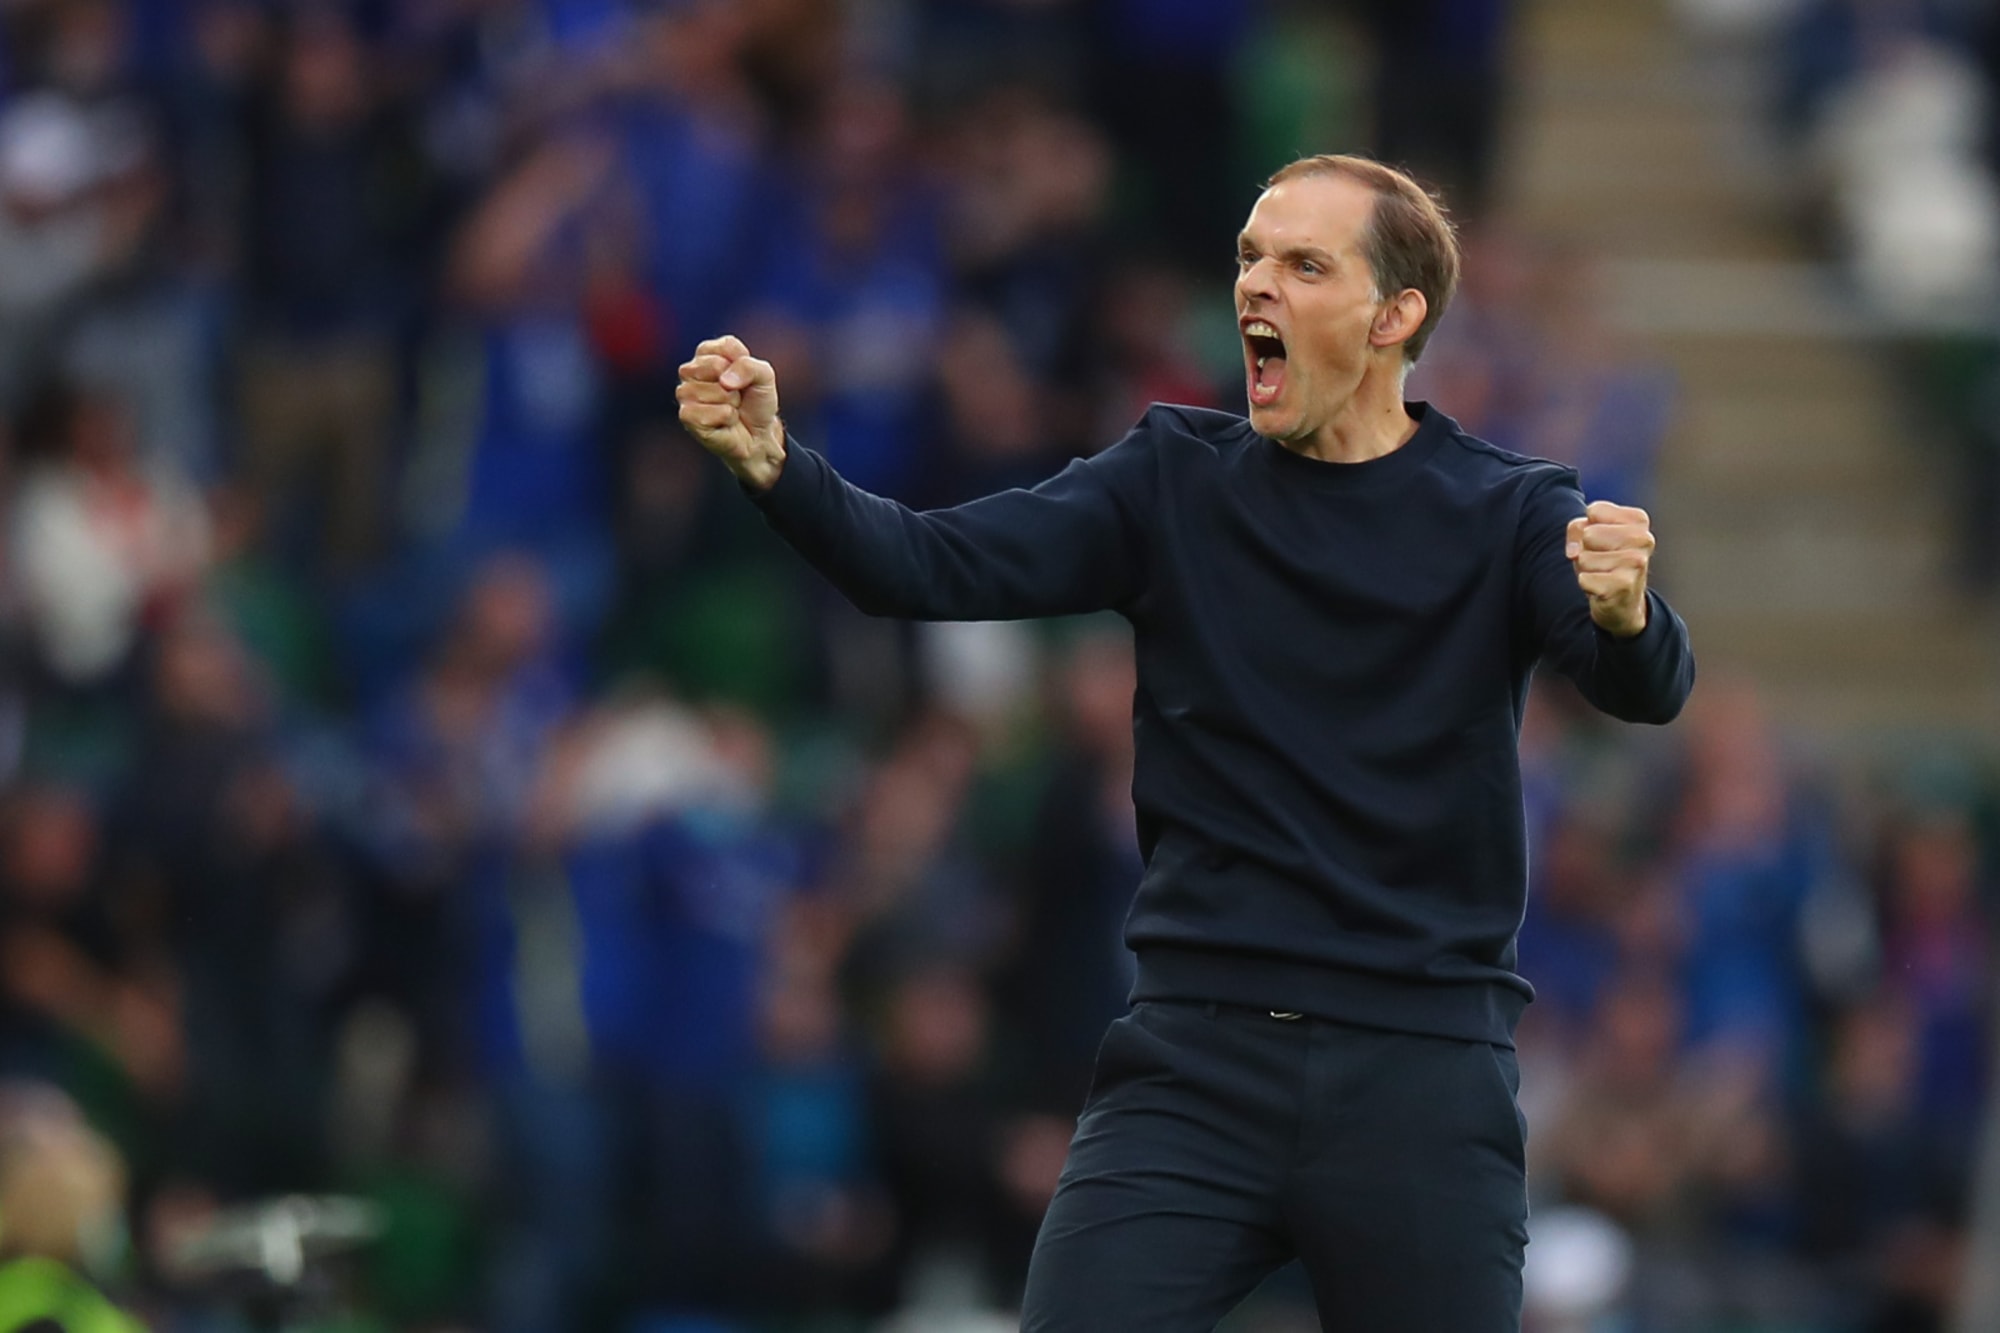 Chelsea manager Thomas Tuchel is setting the standard